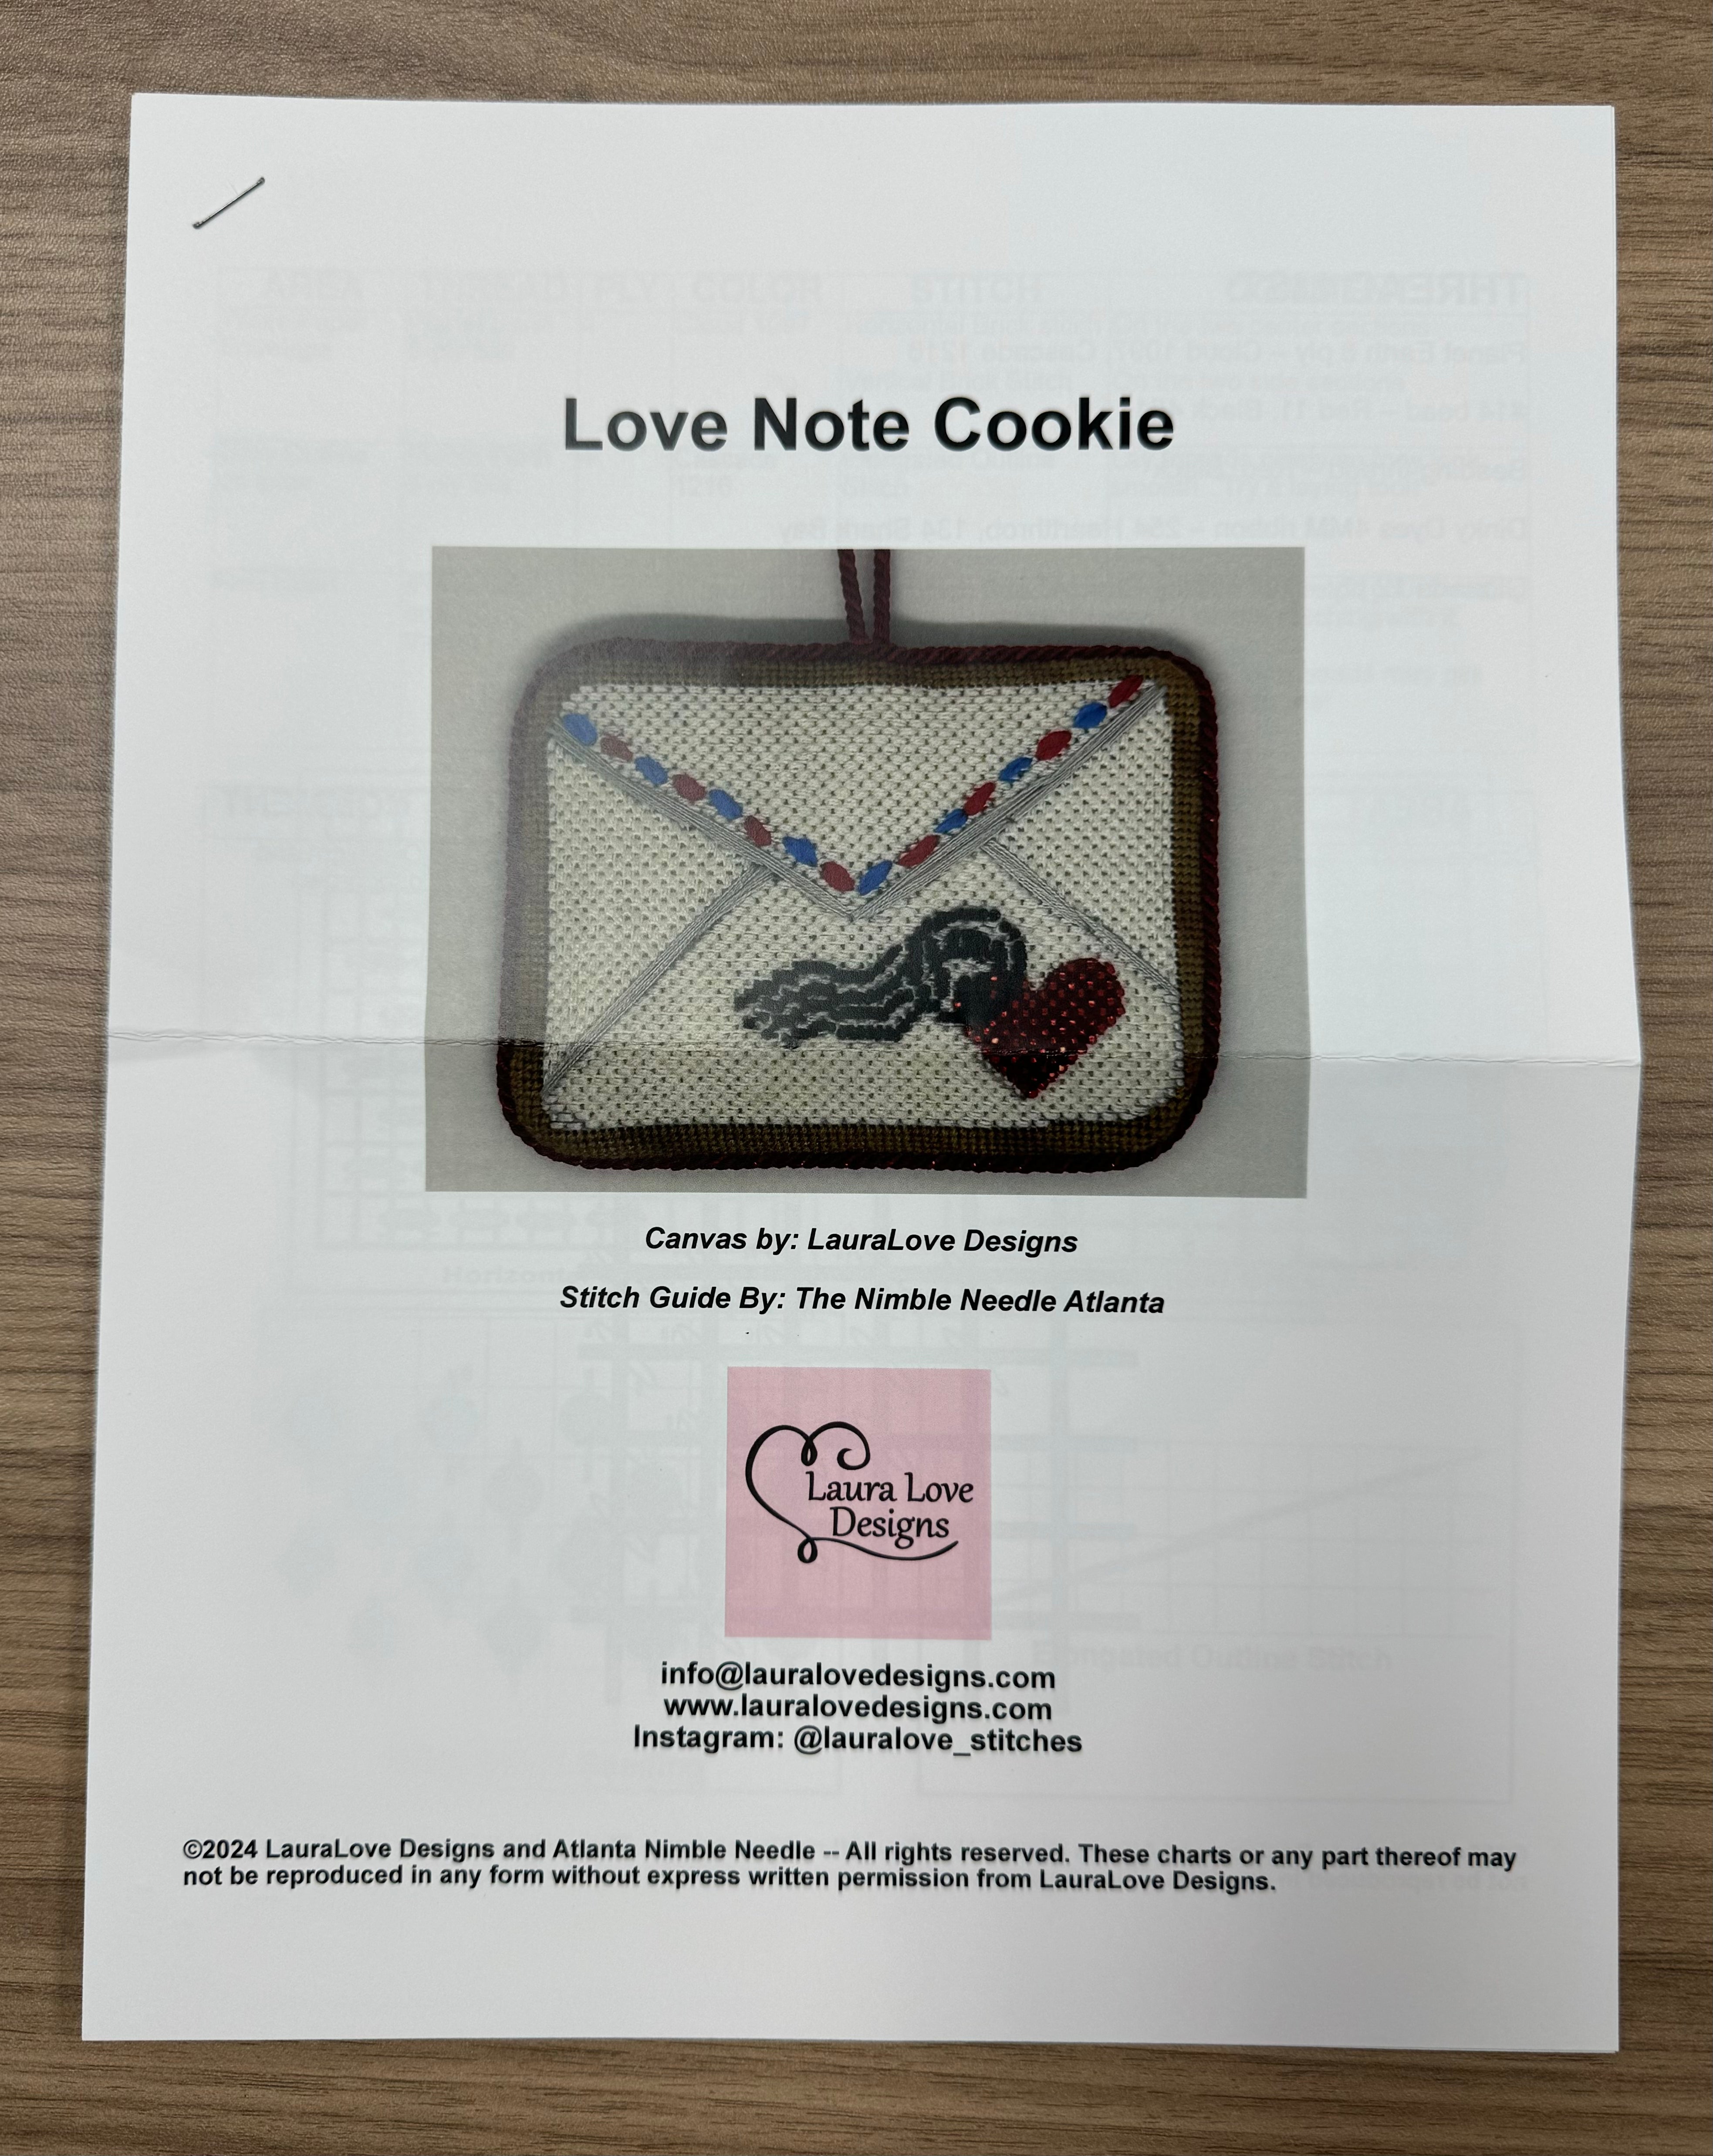 LL-C-016 Envelope Cookie w/ Stitch Guide